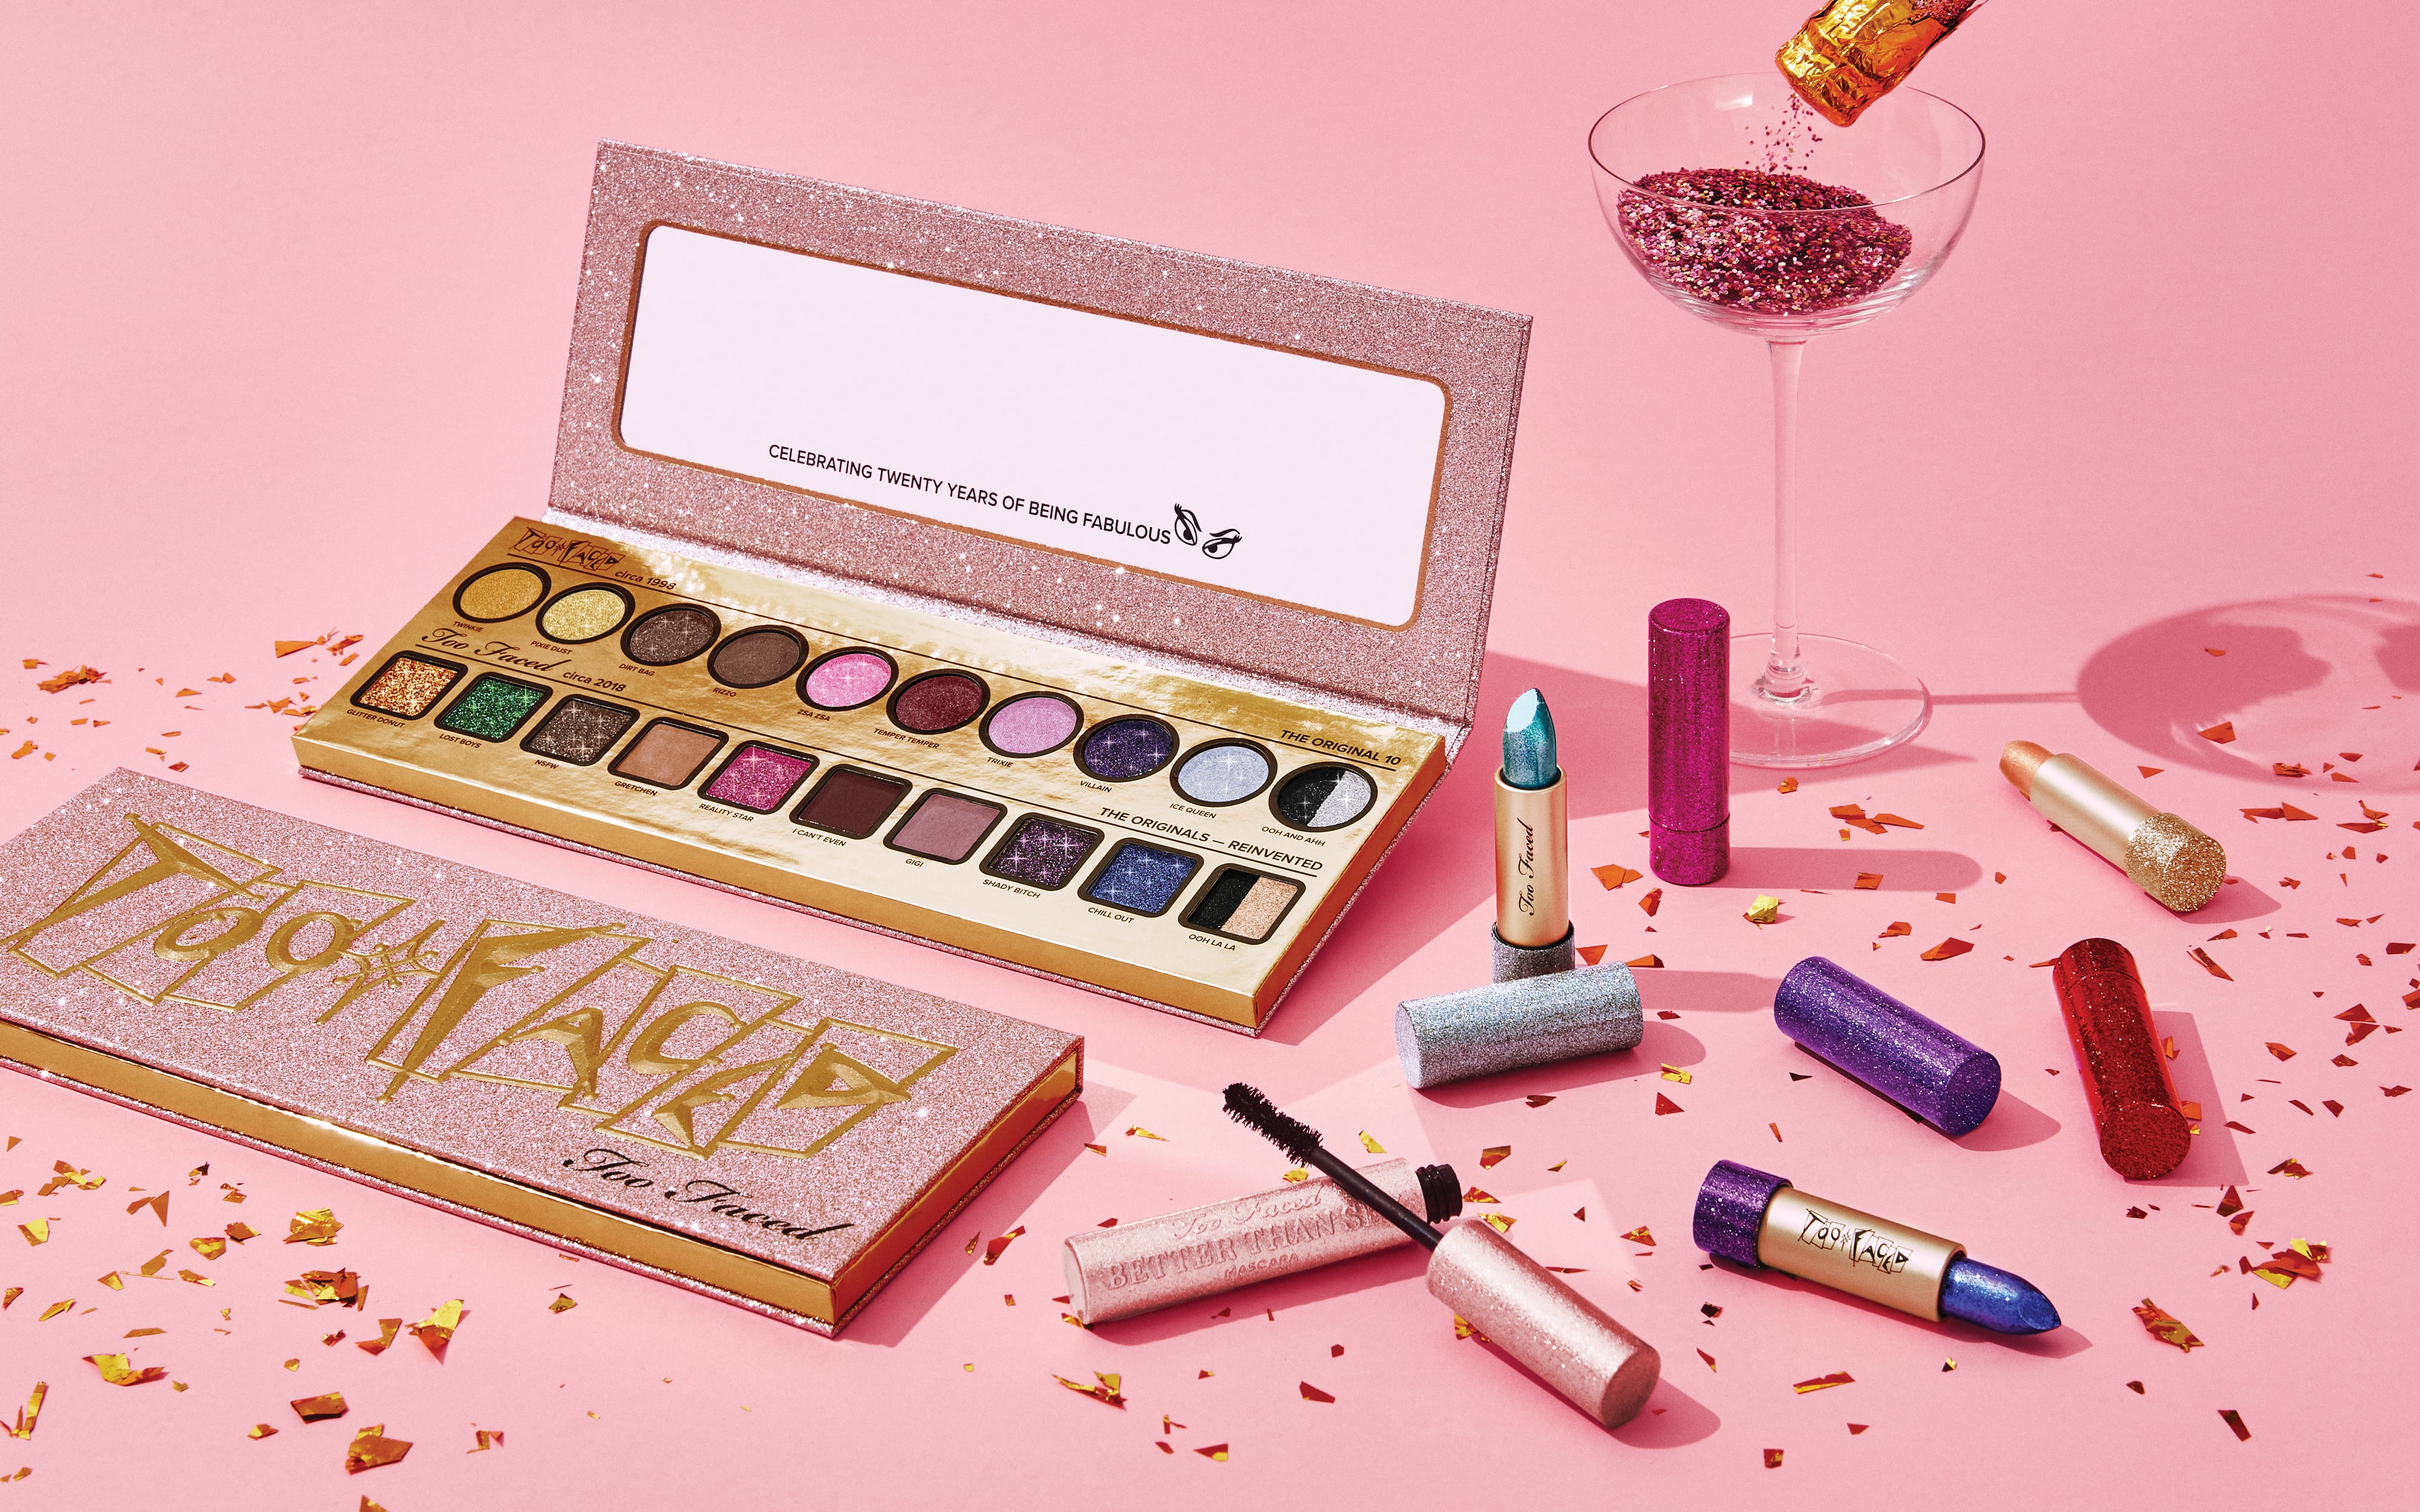 The Story Behind Too Faced, Known for Peach Scented Makeup, and Celebrating 20 Years in the - FASHION Magazine